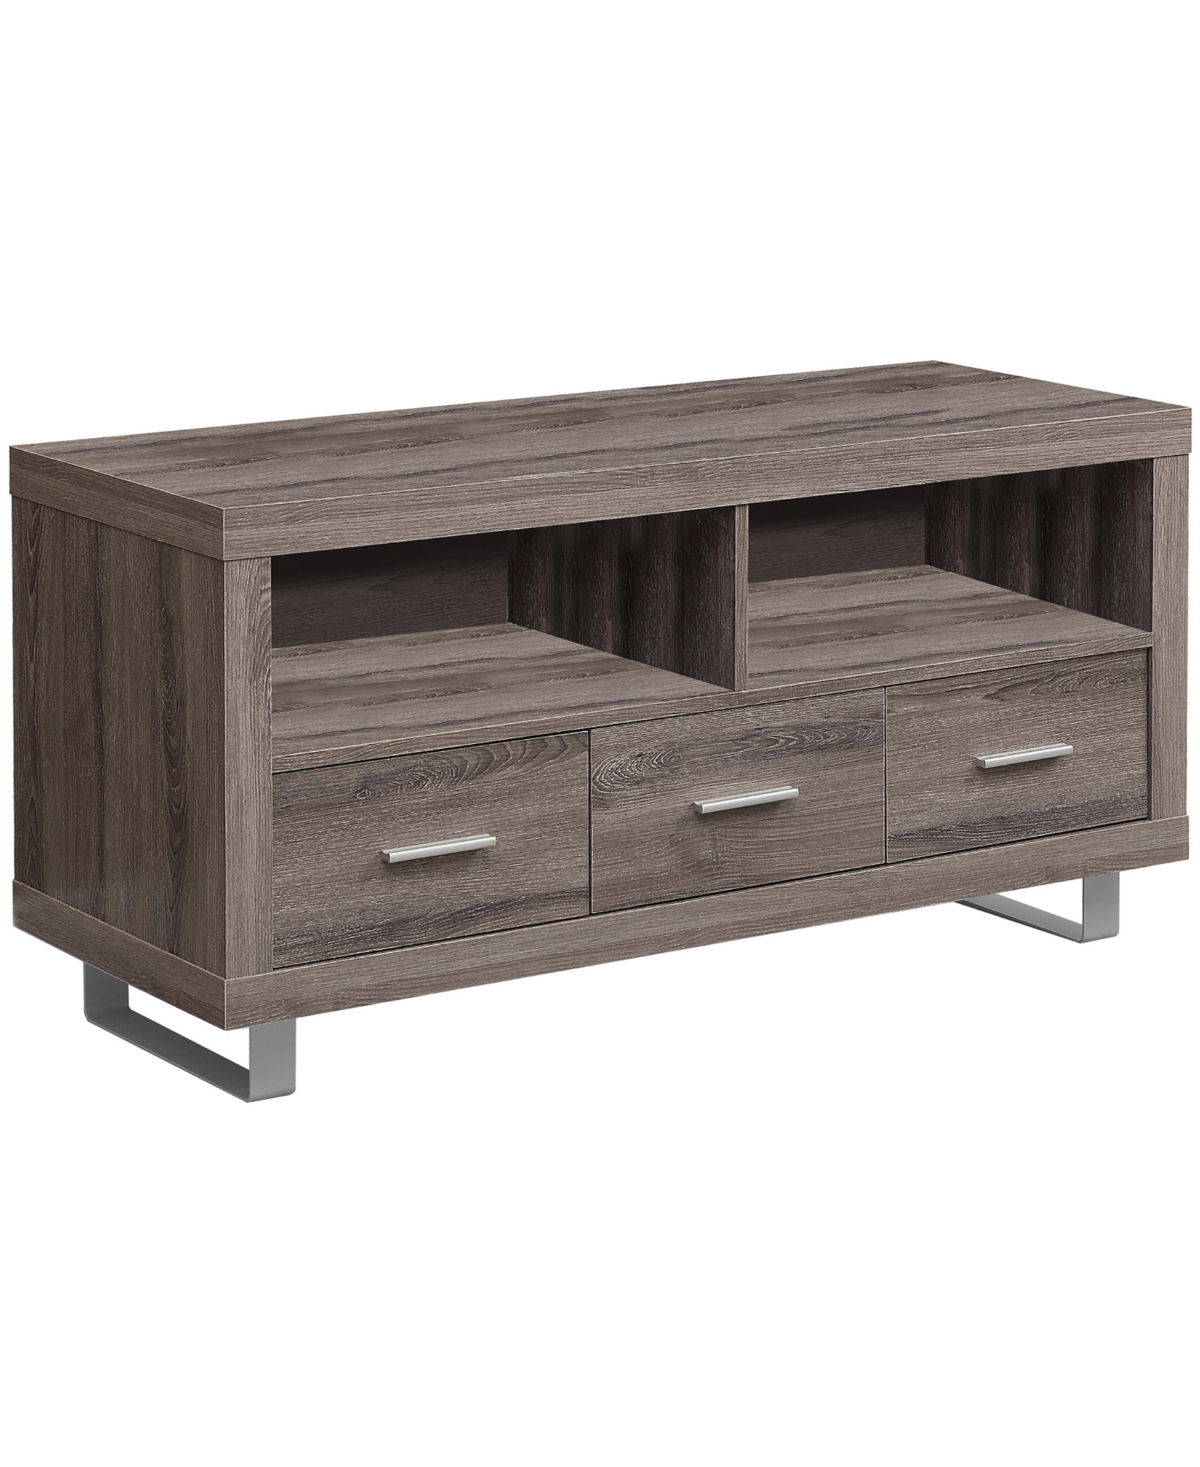 Monarch Specialties 48 L Tv Stand